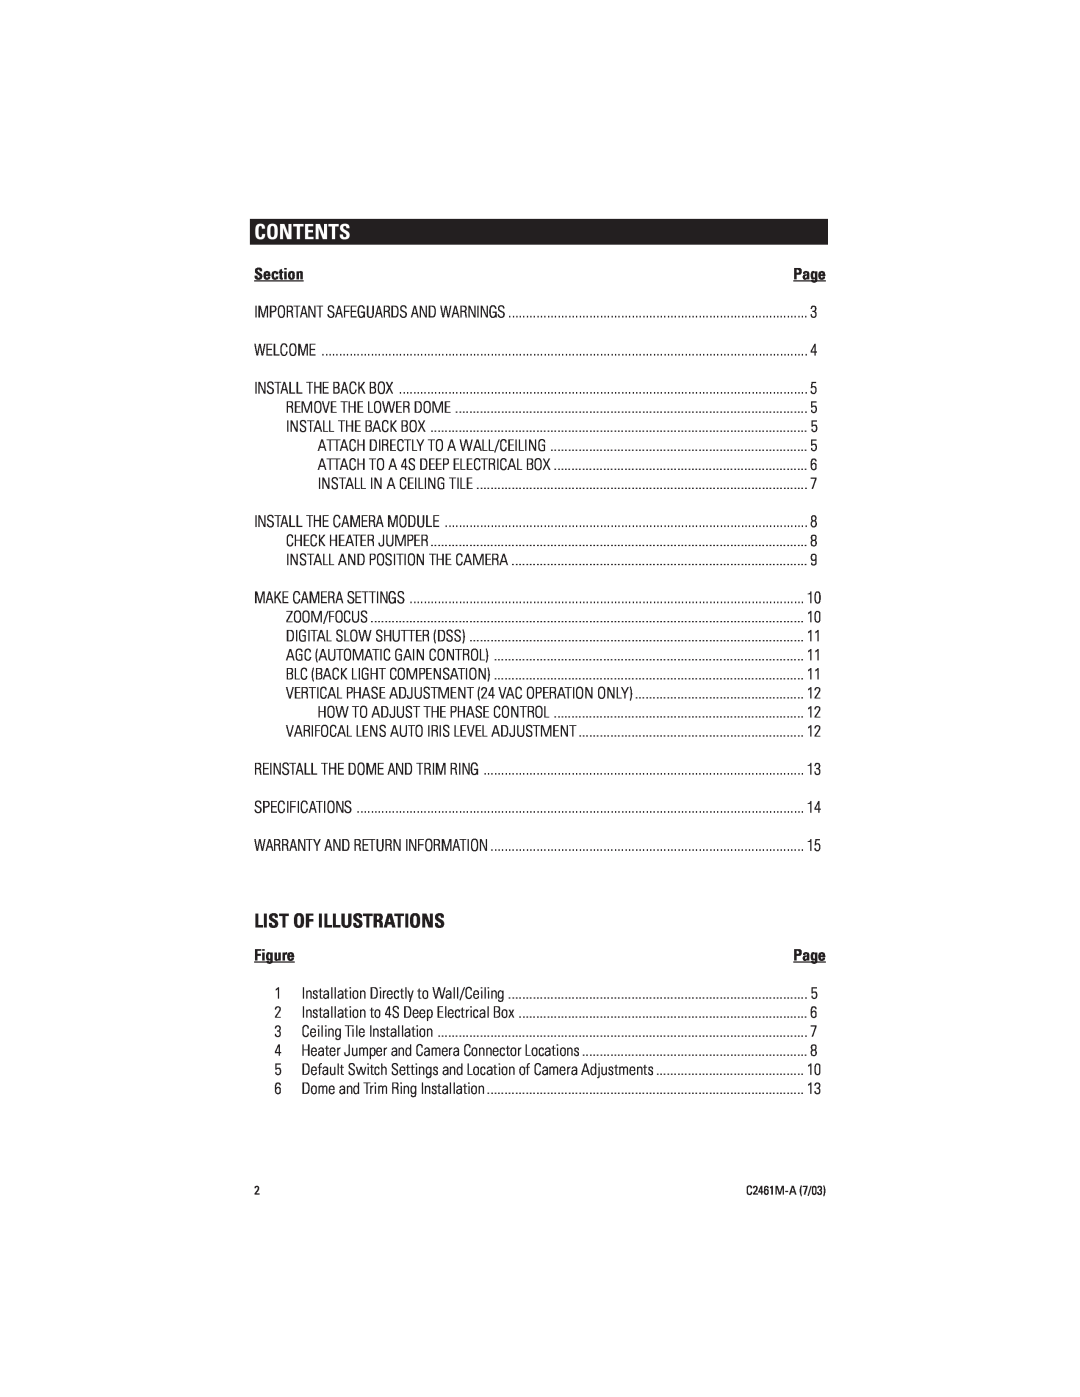 Pelco C2461M-A manual Contents, List Of Illustrations, Section 